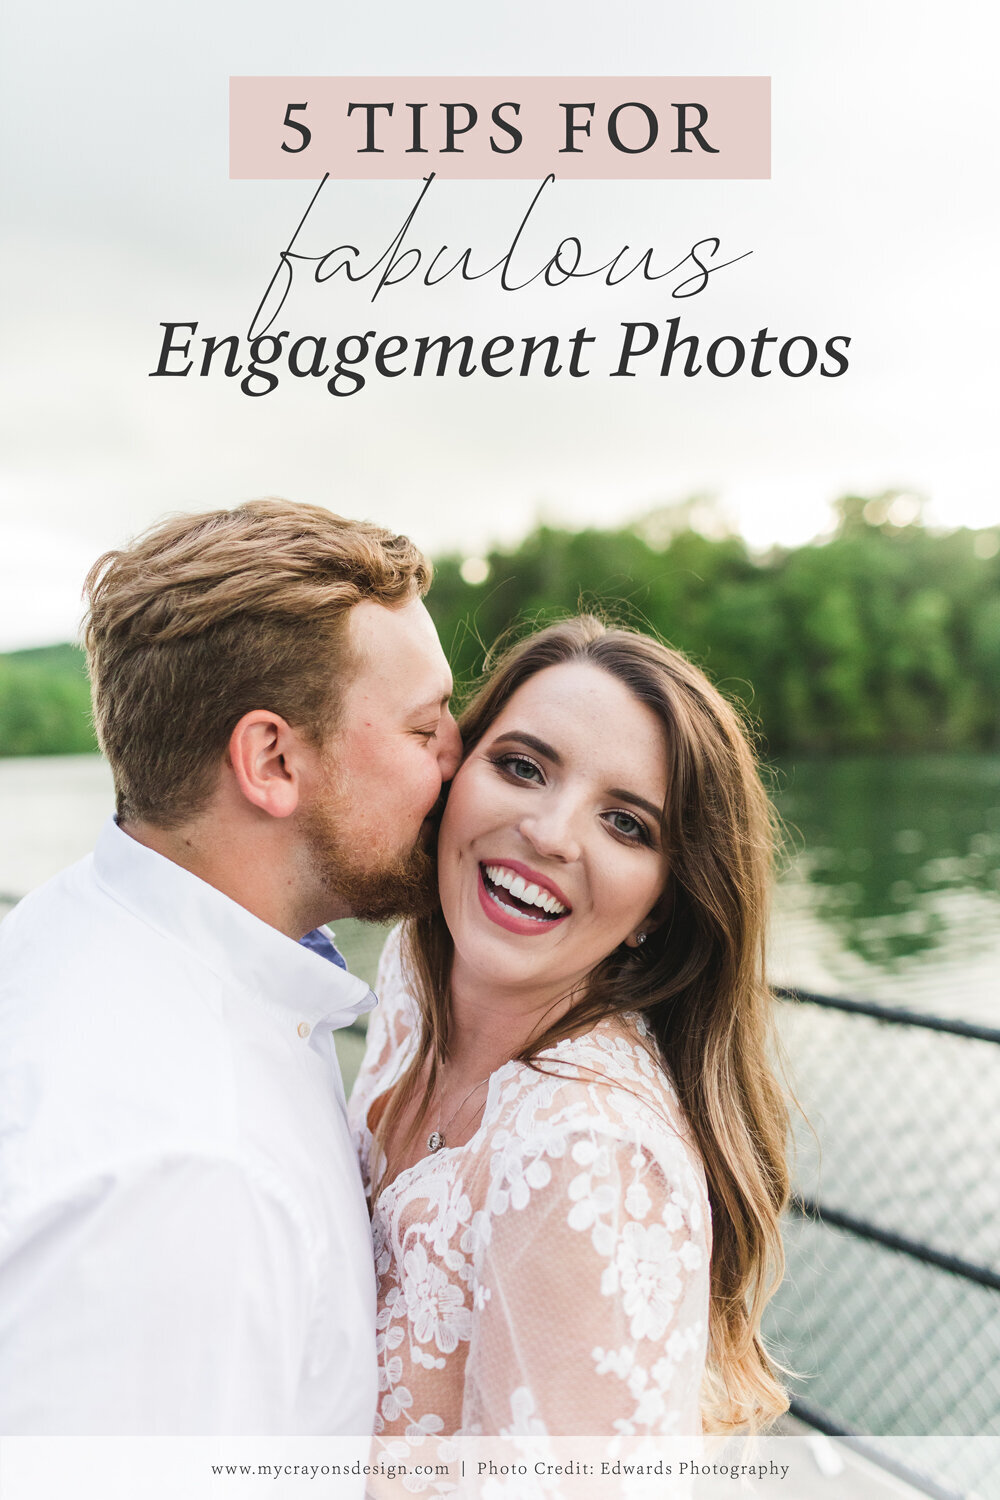 engagement photo ideas and tips from wedding photographers